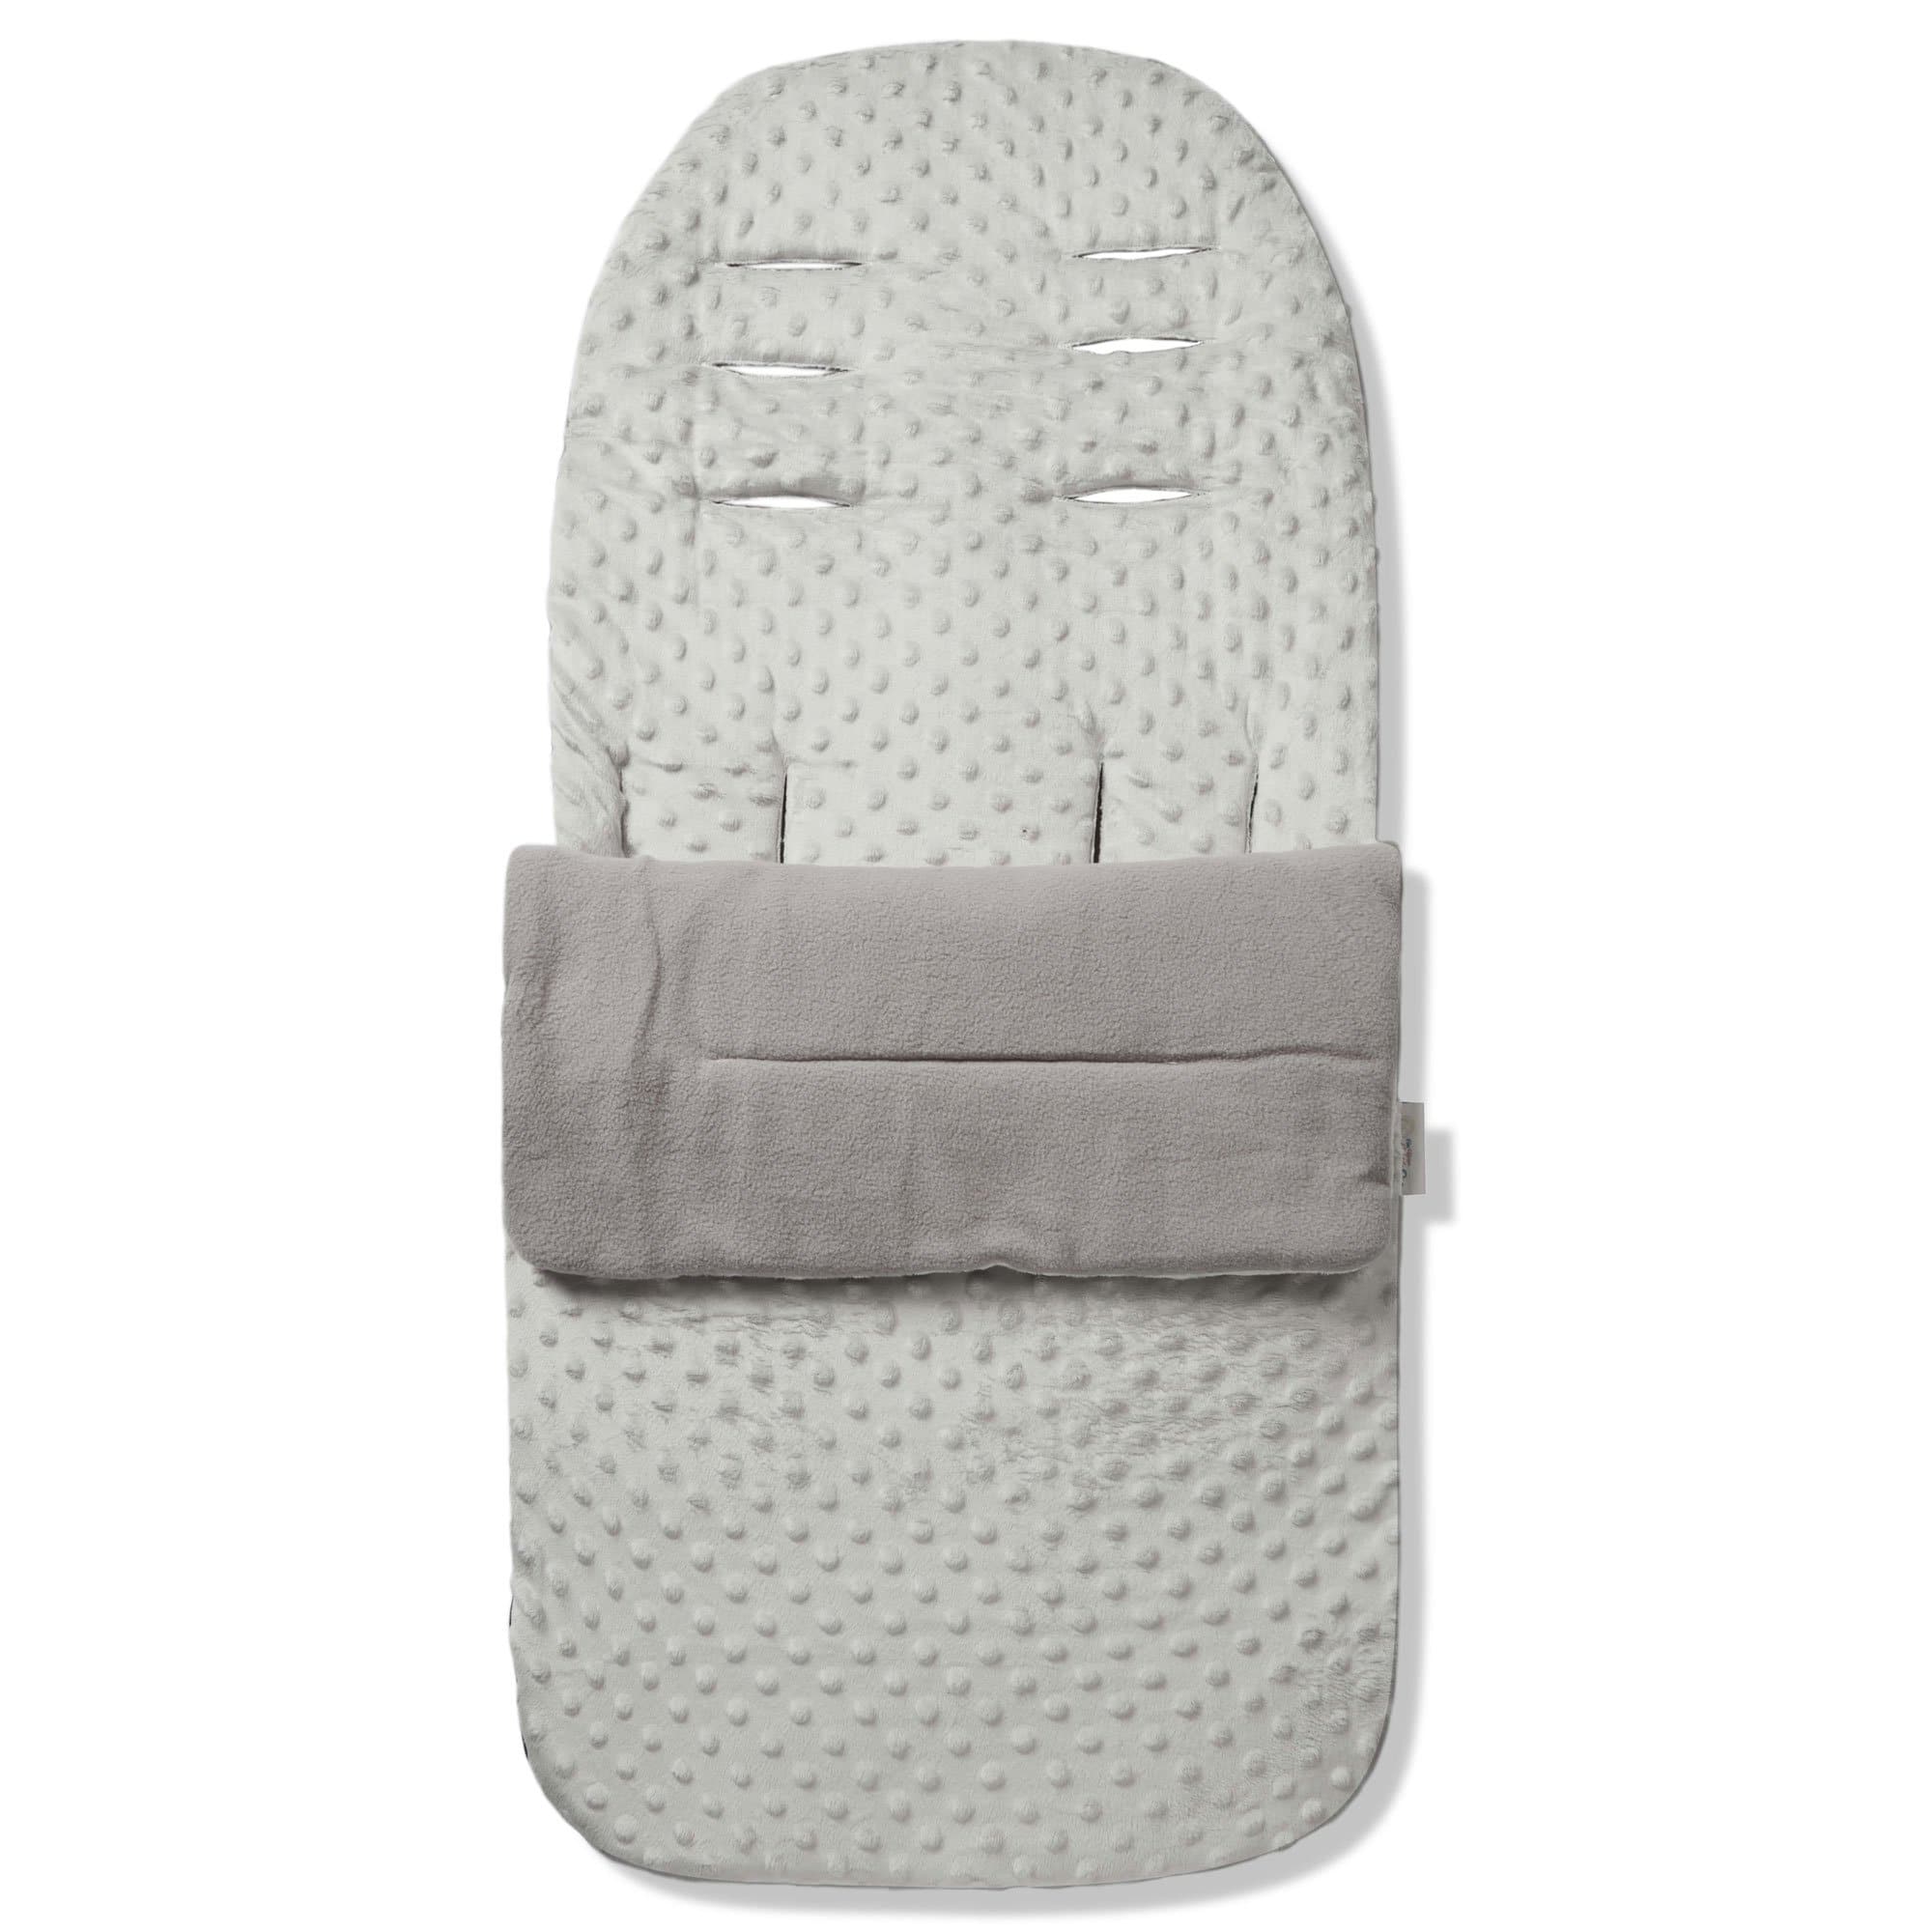 Dimple Footmuff / Cosy Toes Compatible with Combi - For Your Little One